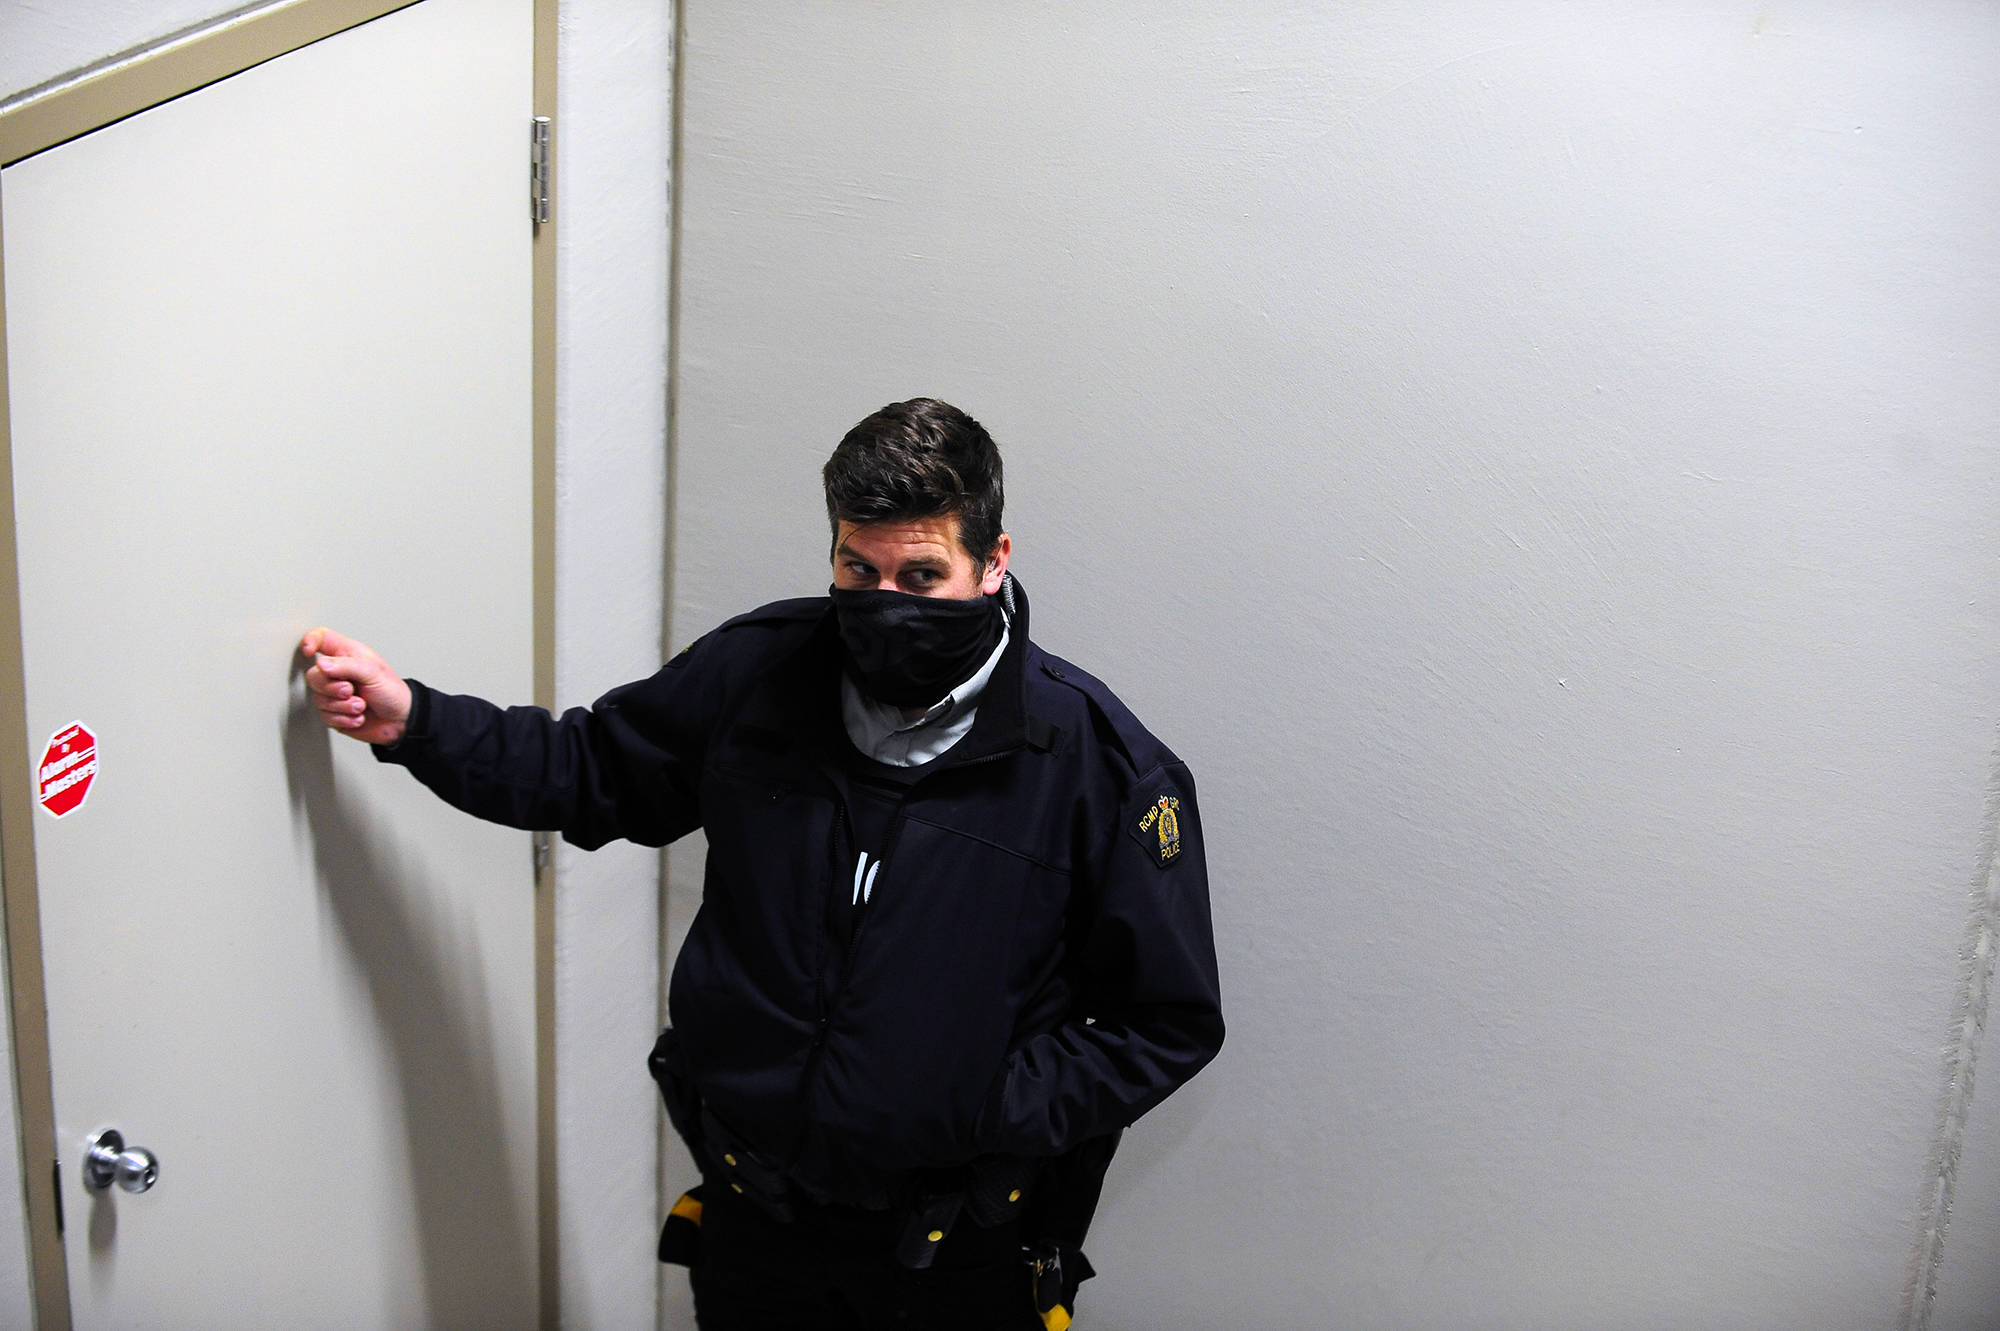 An RCMP officer knocks on the door where parishioners of Kelowna Harvest Fellowship are gathering on Sunday, Jan. 10. (Michael Rodriguez - Capital News)